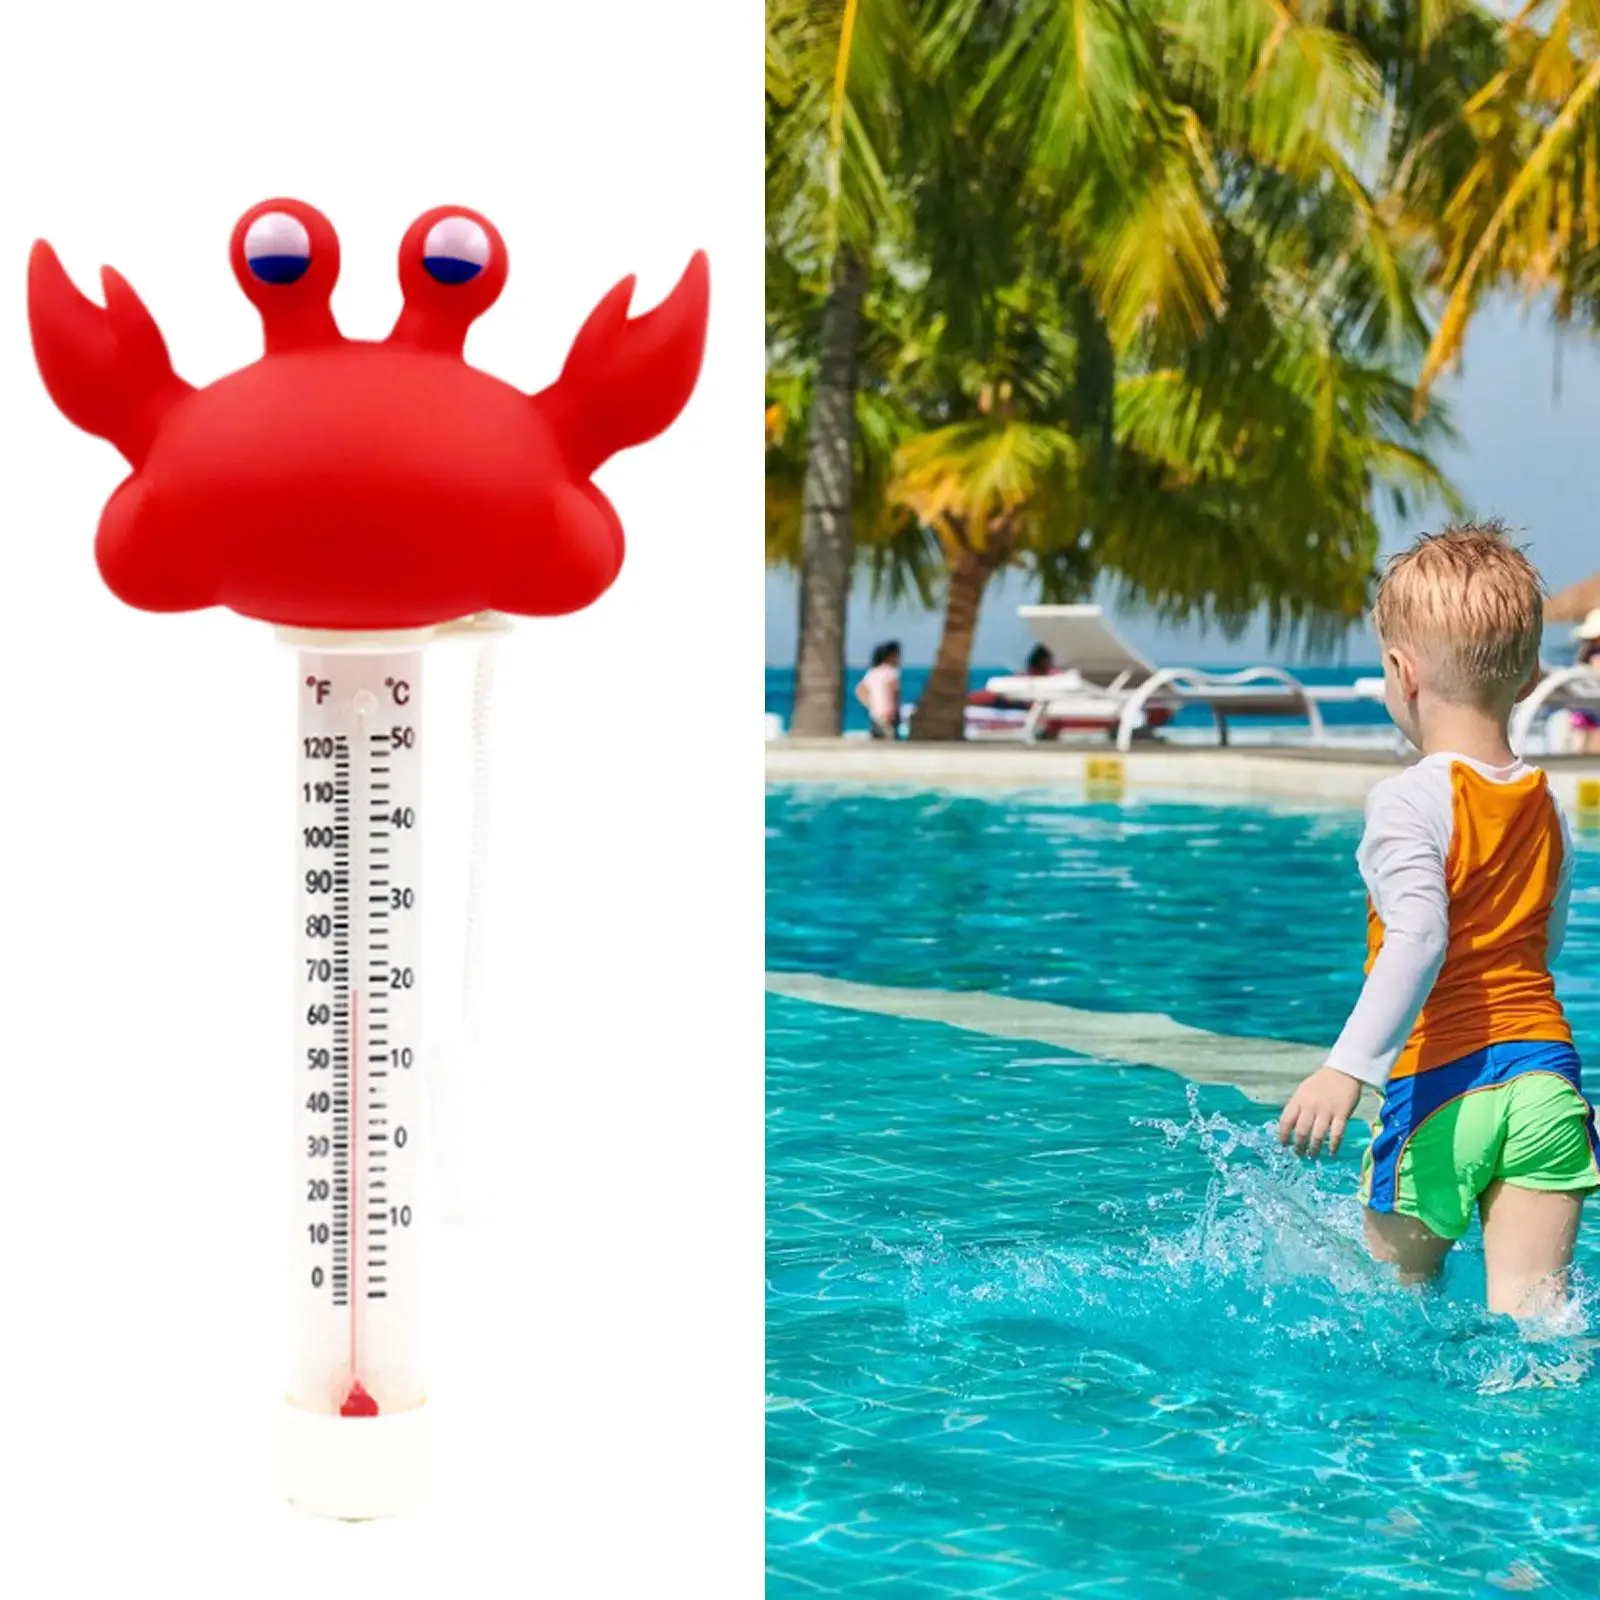 Pools Floating Water Thermometer Measurement Portable for Hot Tubs Aquariums